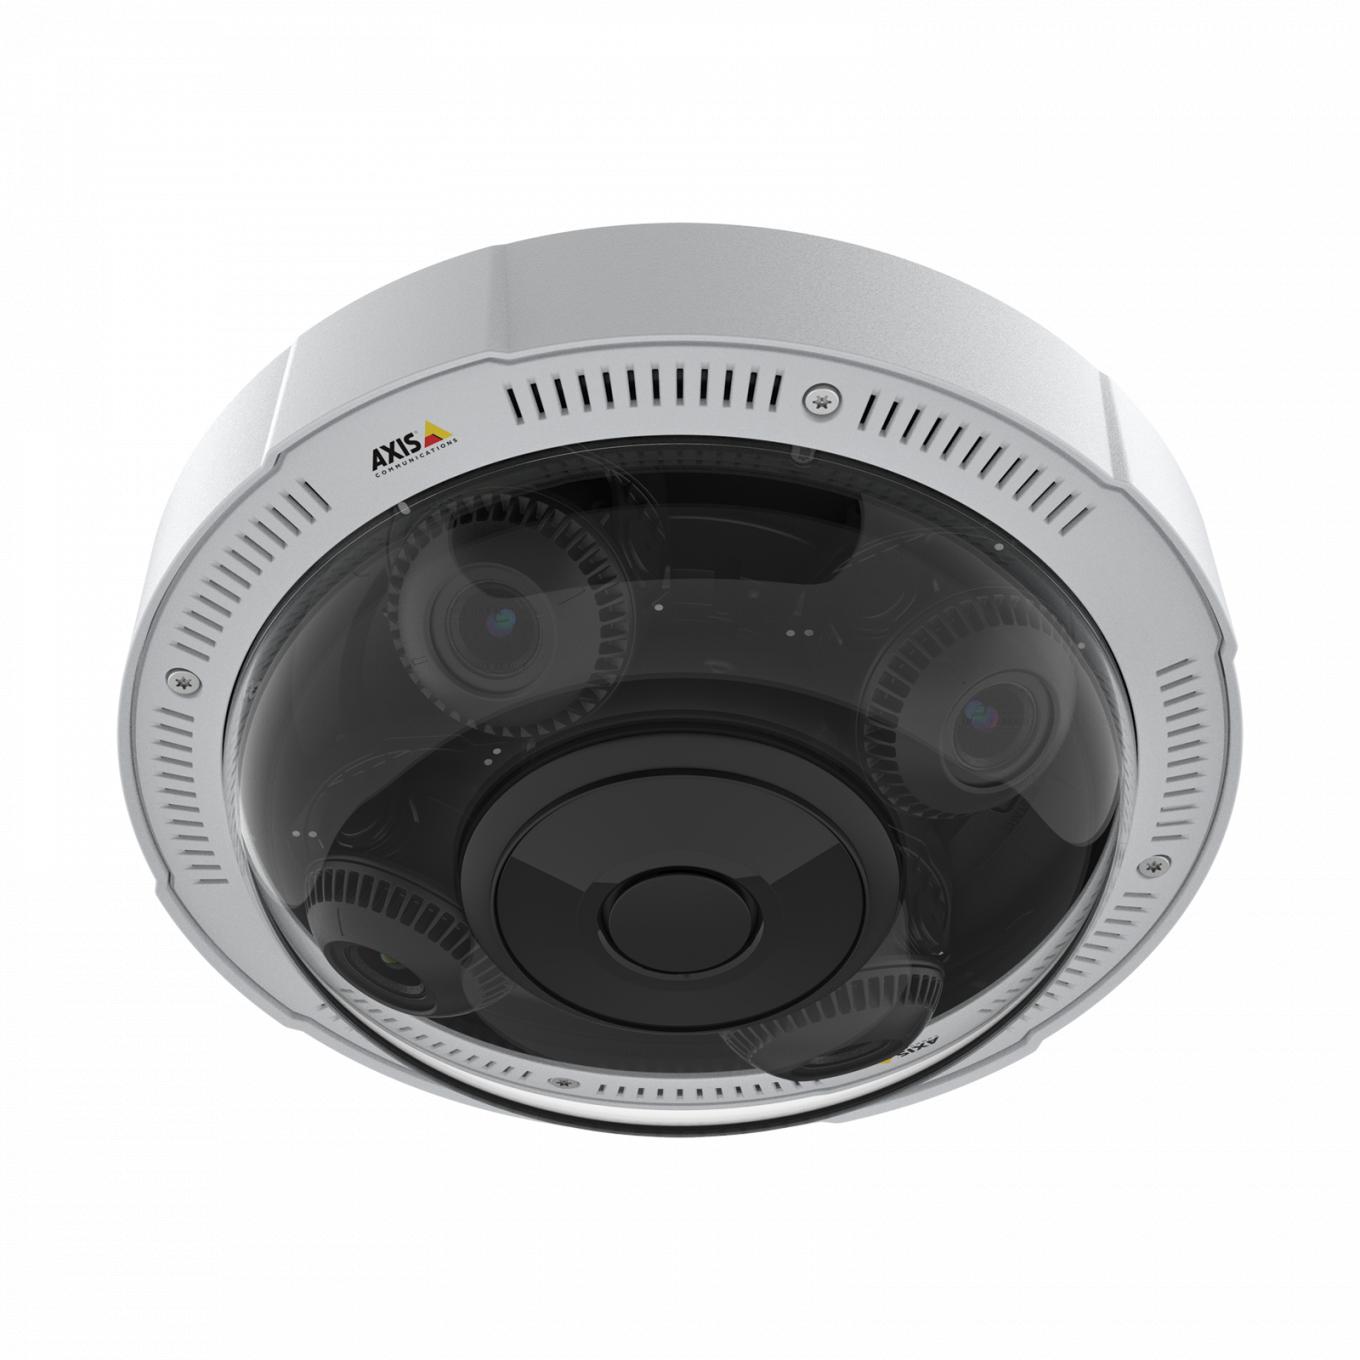 AXIS P3727-PLE Panoramic Camera, viewed from its left angle